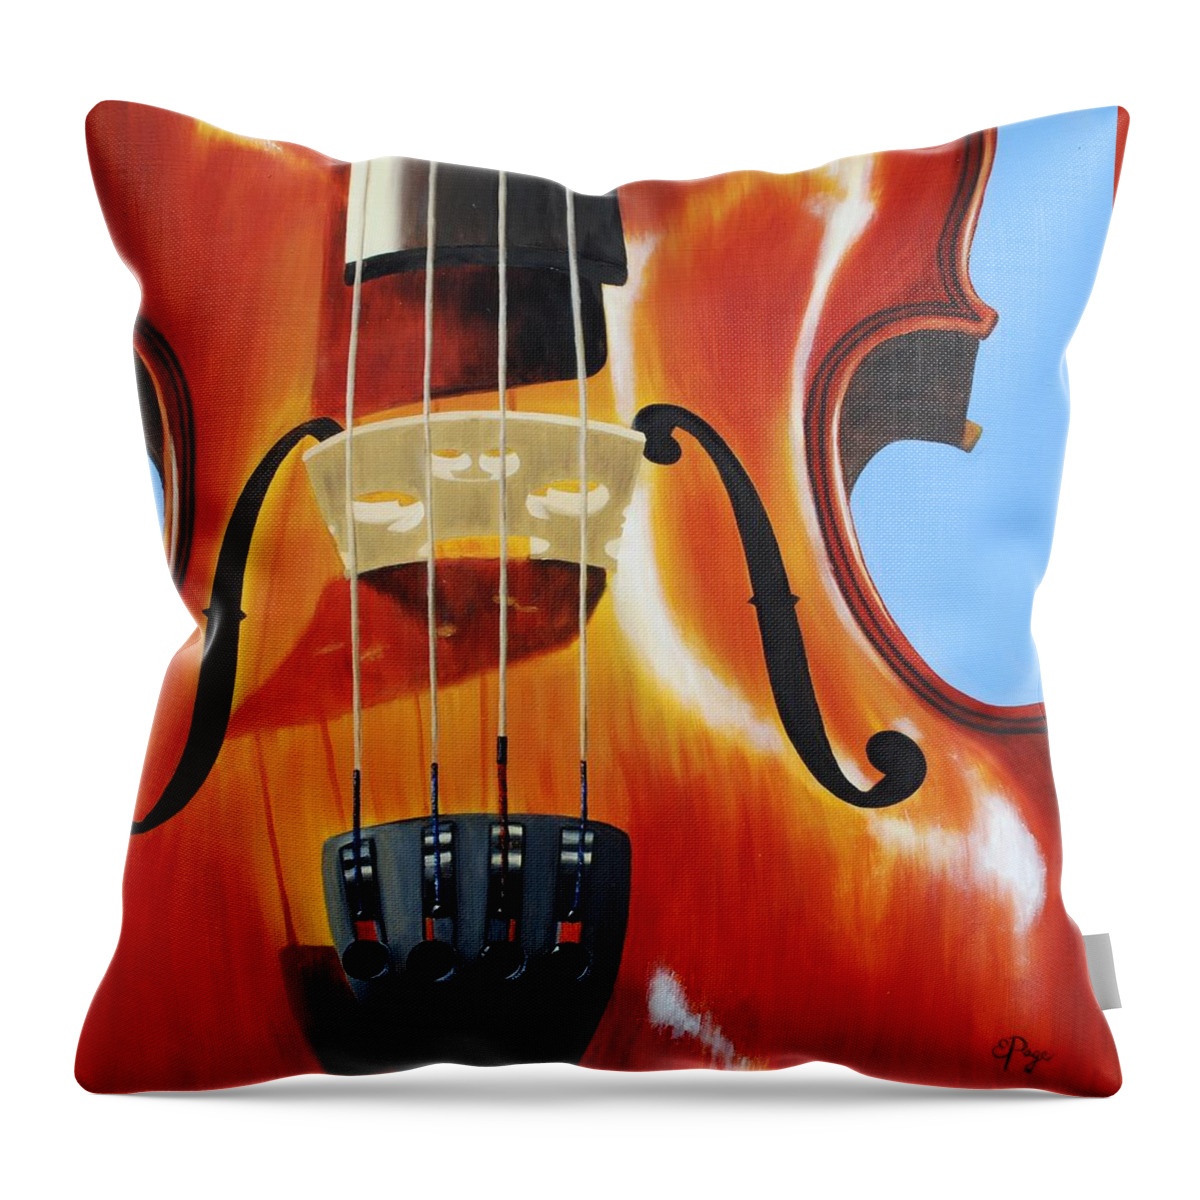 Violin Throw Pillow featuring the painting Violin by Emily Page